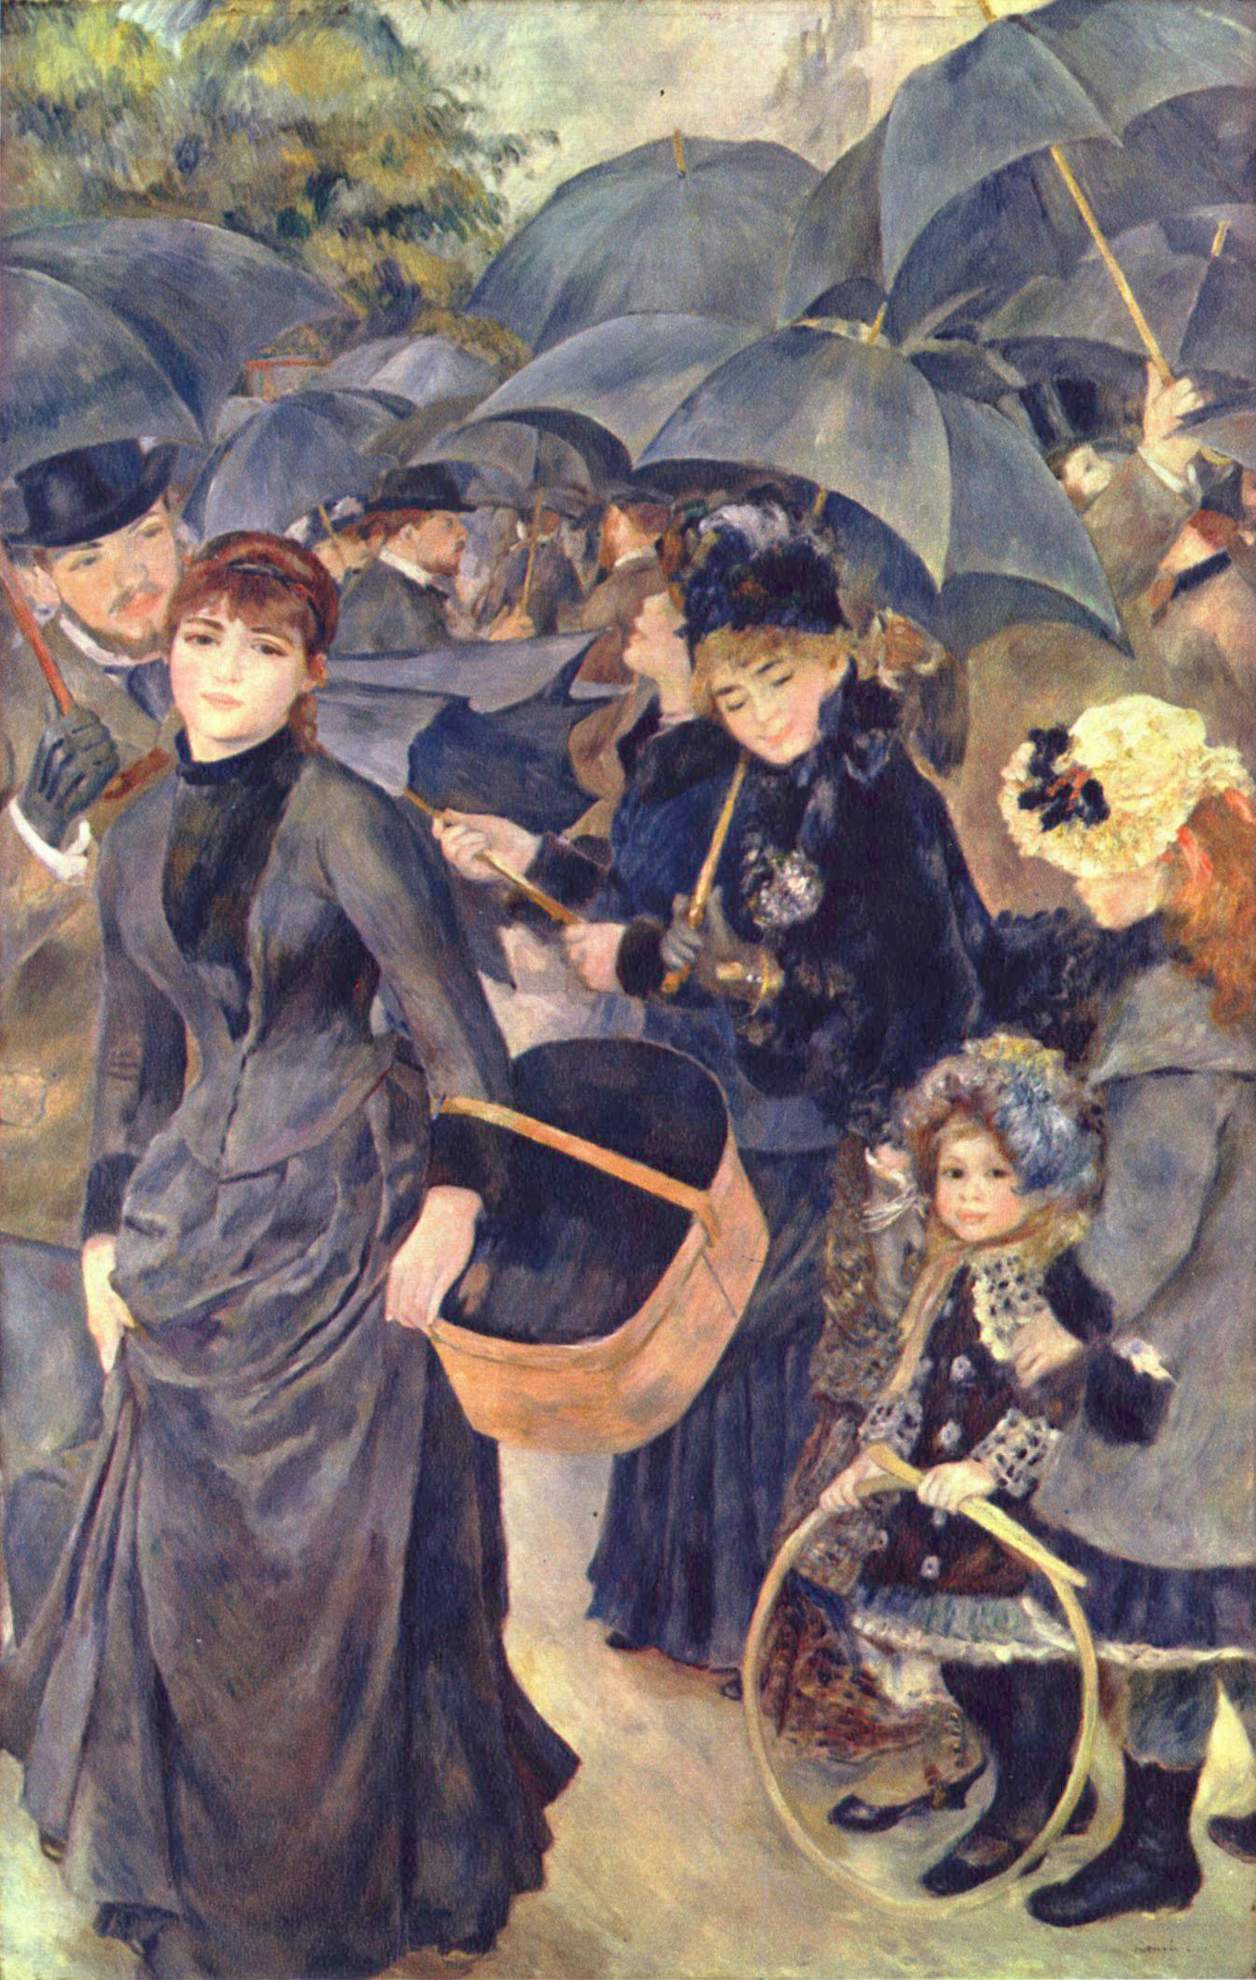 The Umbrellas - 1883 - Oil on canvas - The National Gallery, London, UK